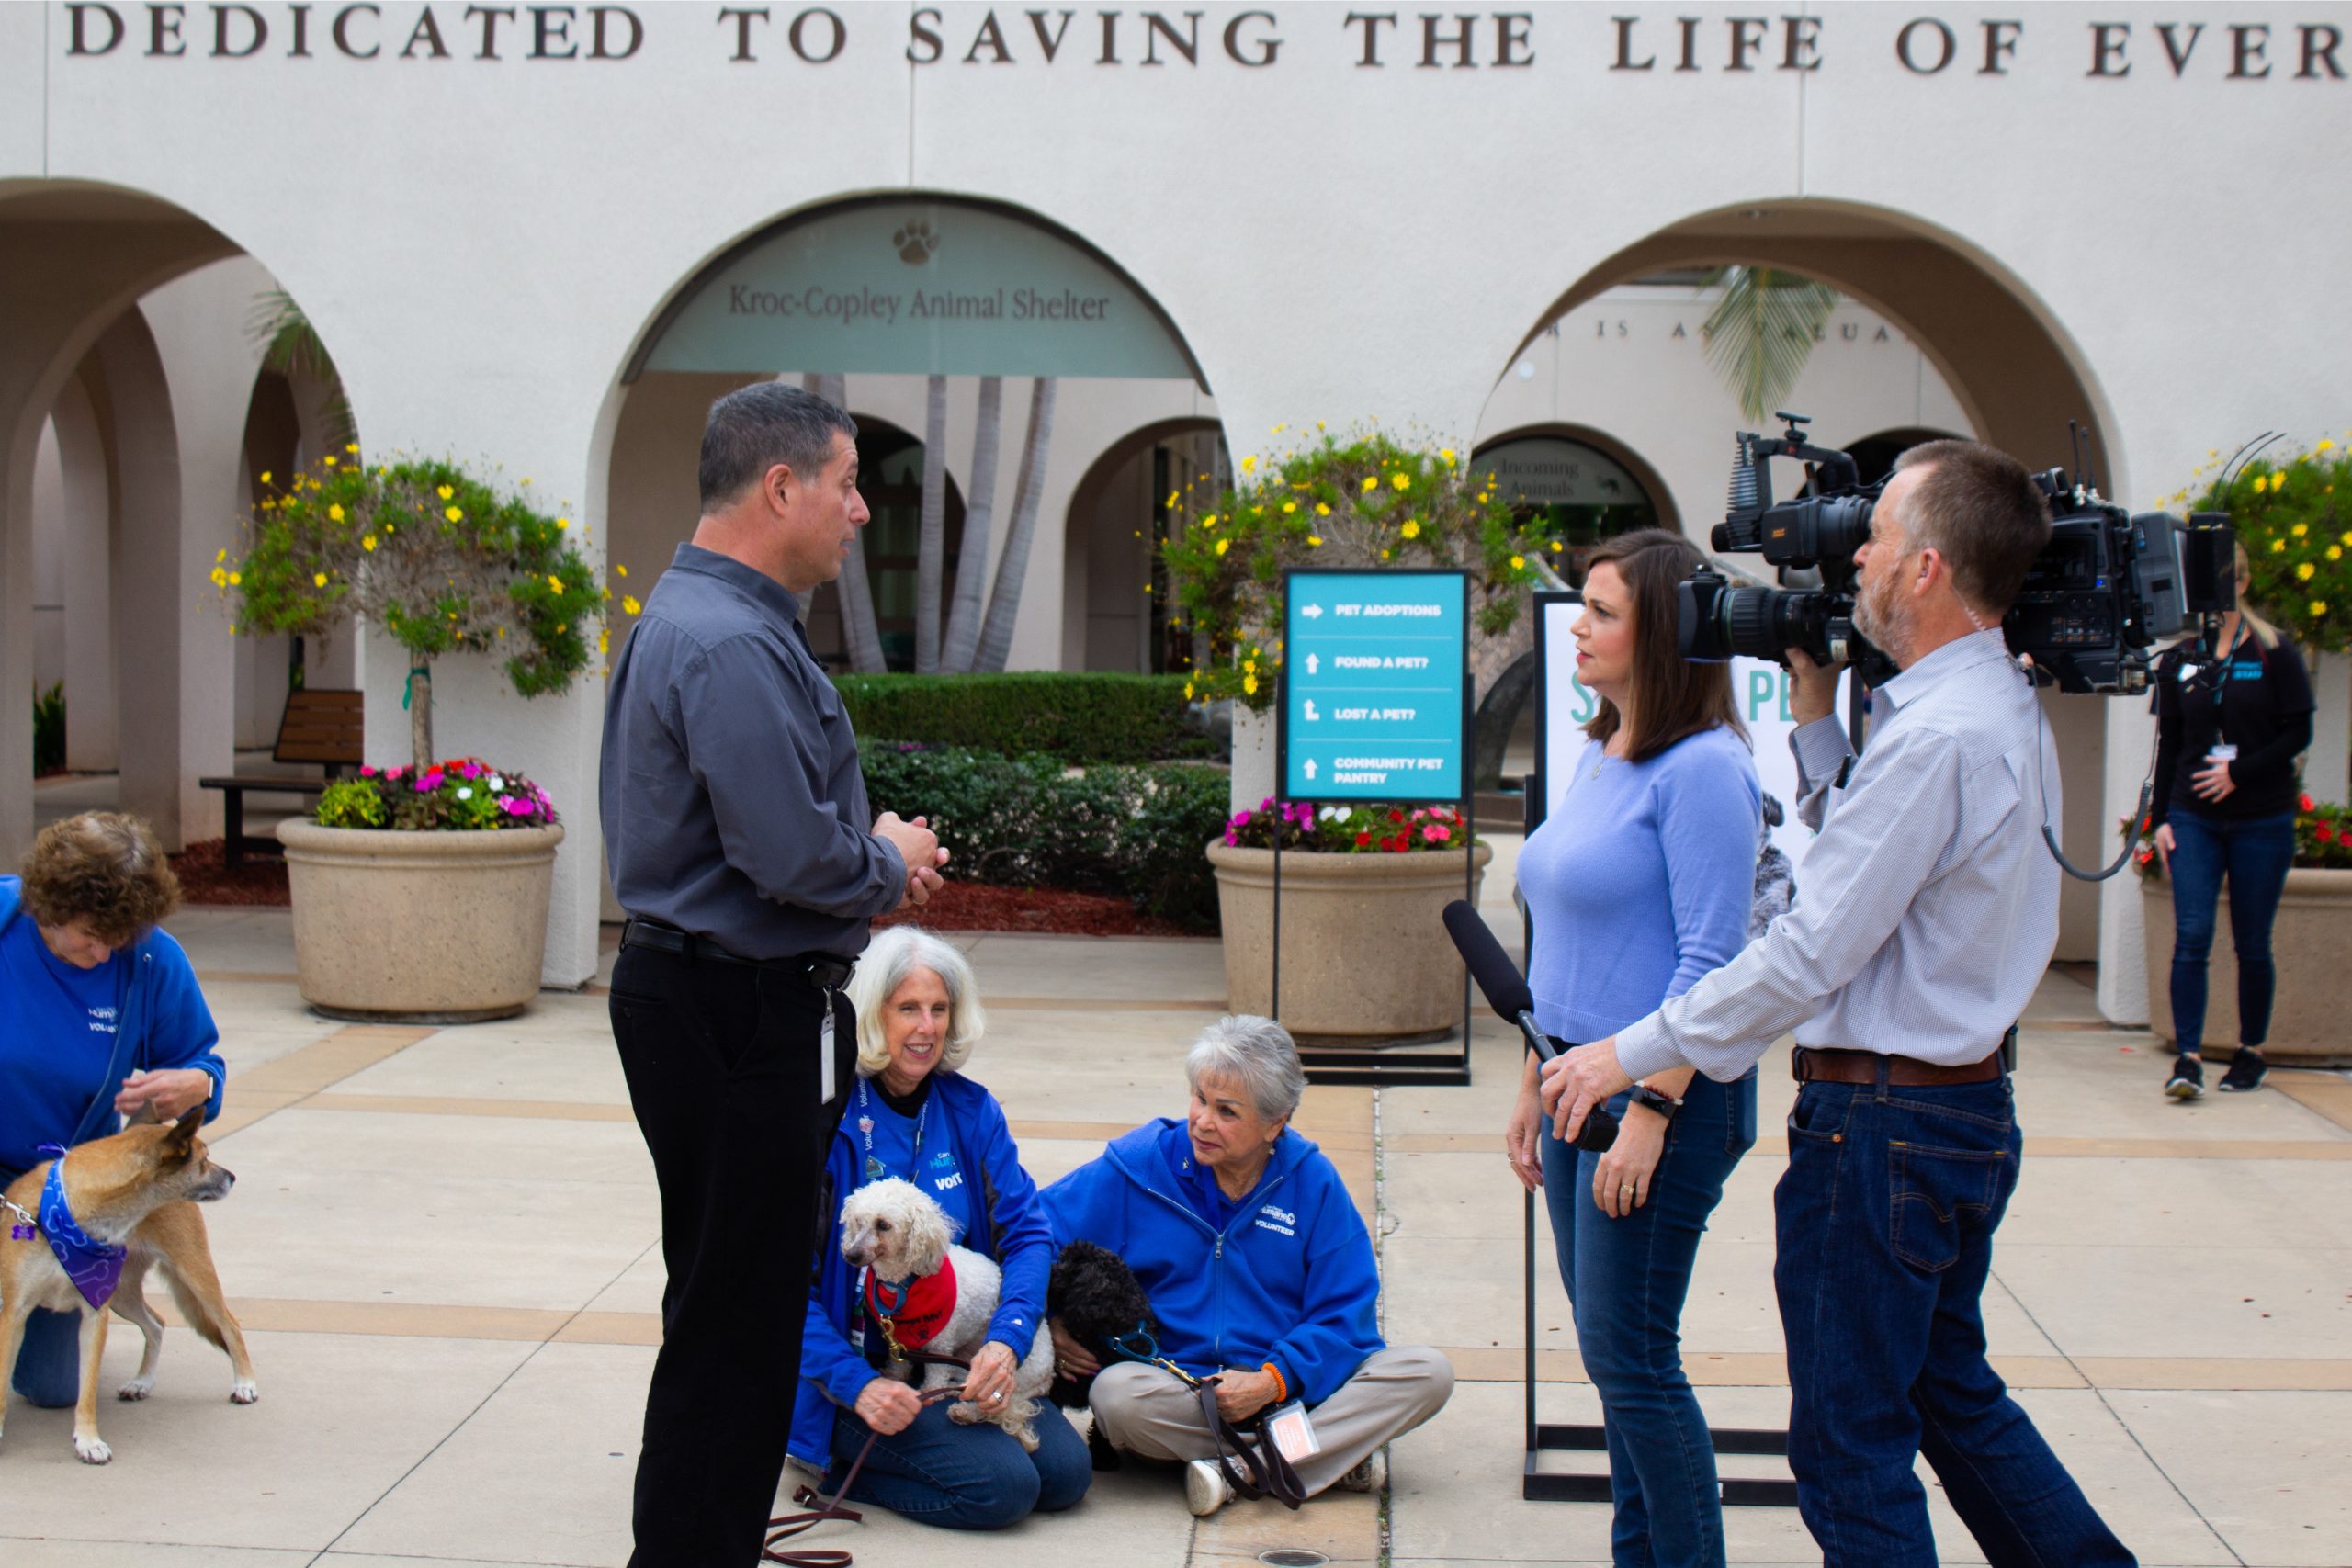 San Diego Humane Society, CEO, Gary Weitzman, being interviewed by a female reporter and male camera man outside the Kroc-Copley Animal shelter with shelter staff and dogs in seated in the background